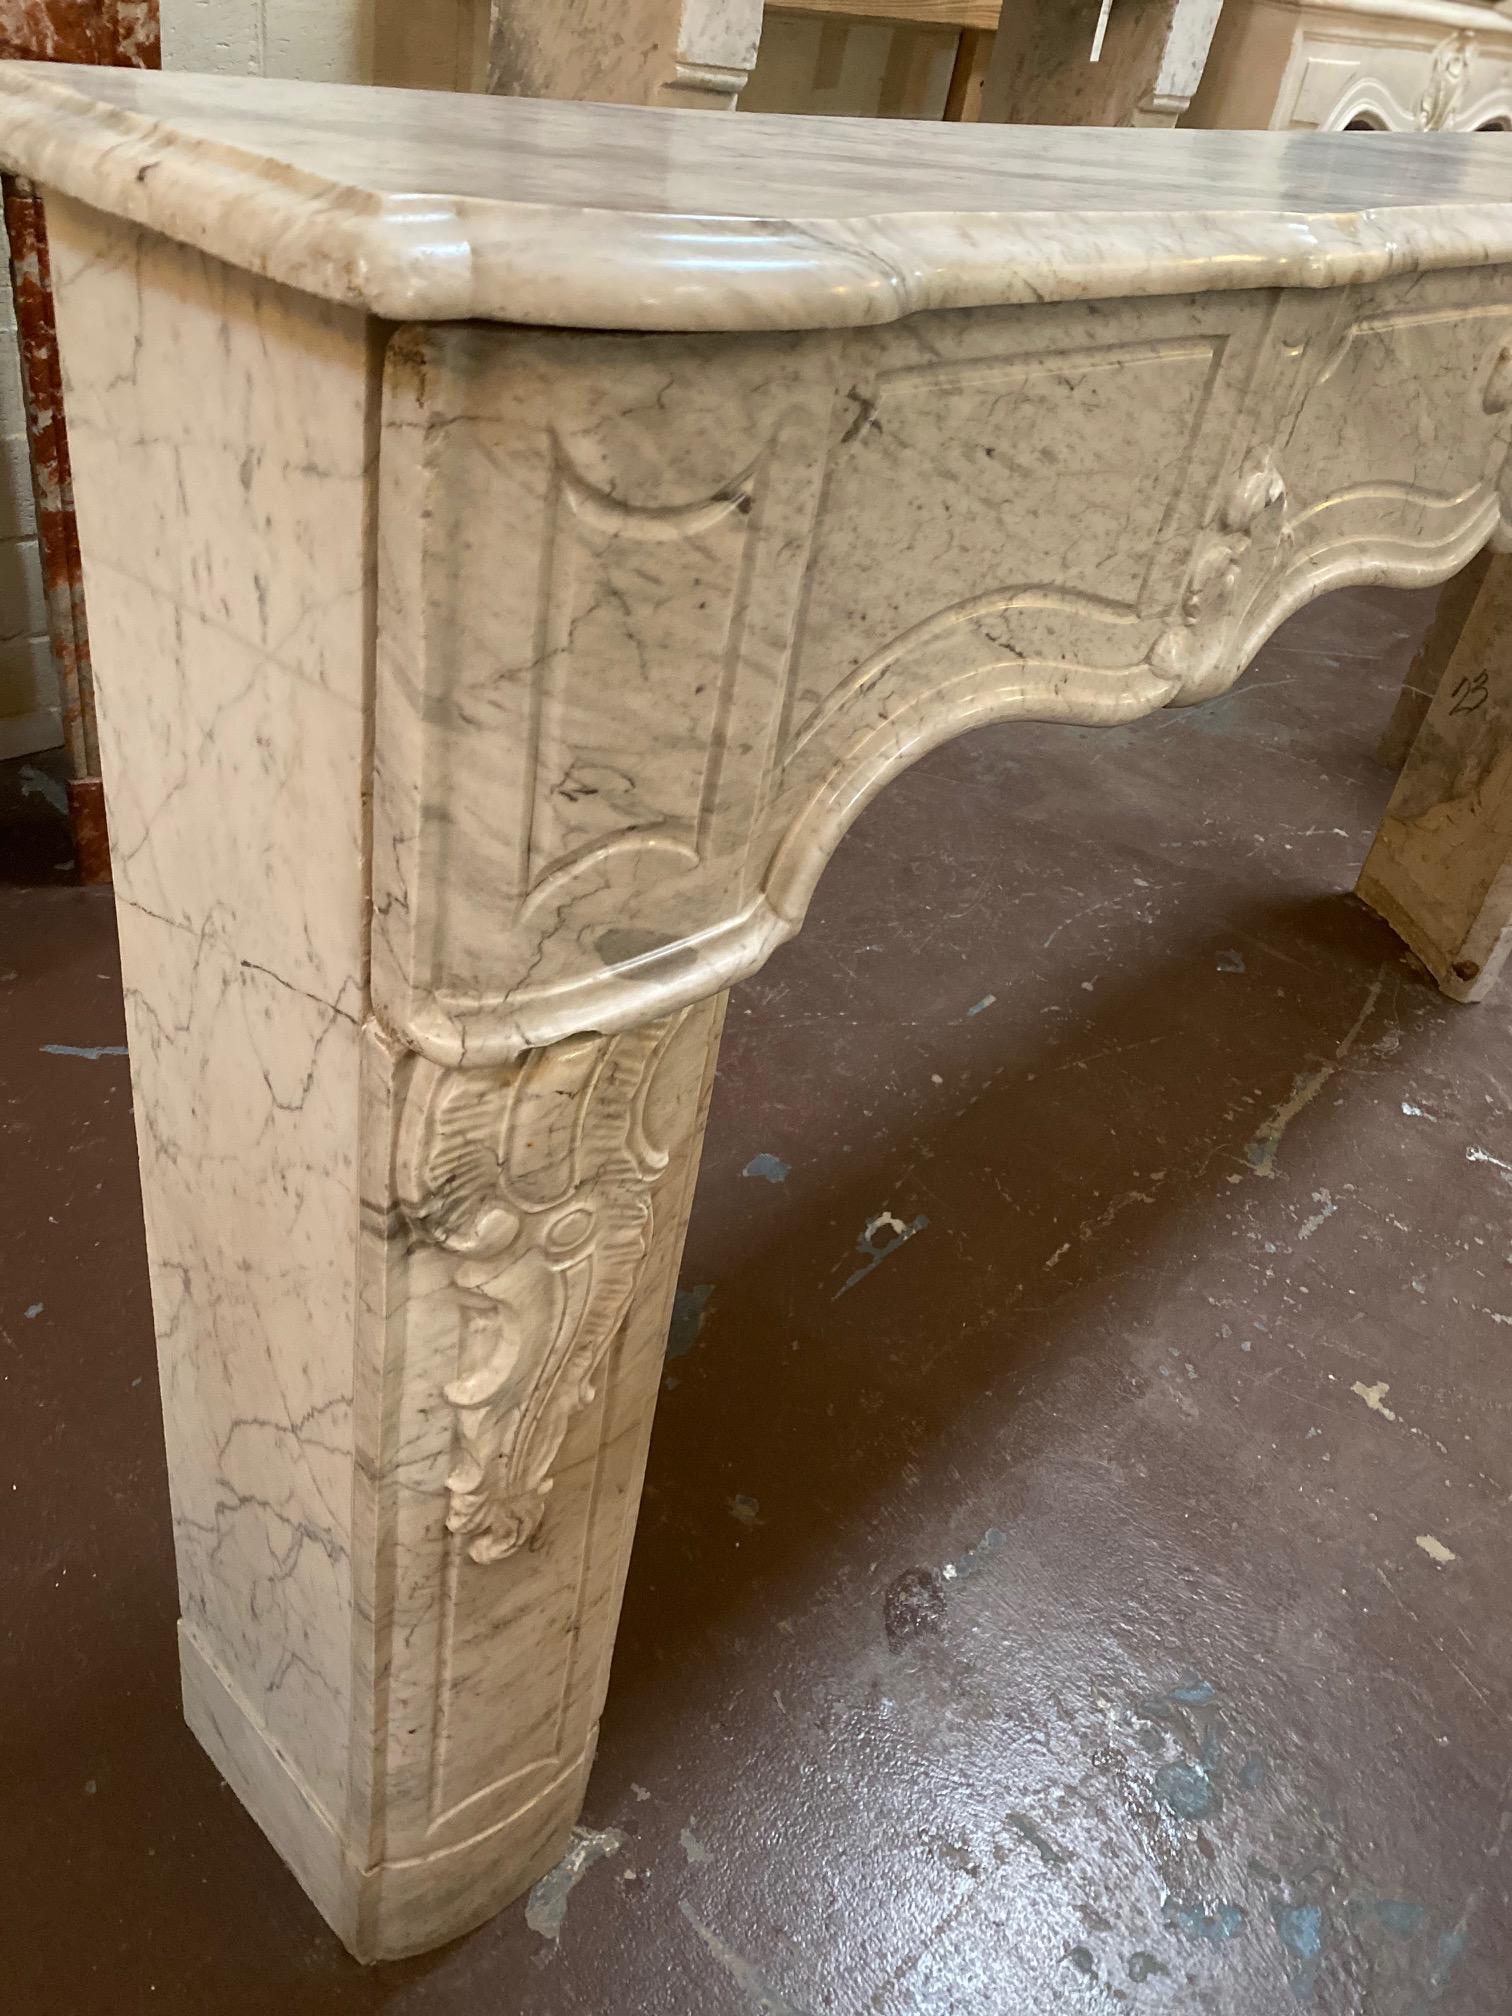 This Louis XVI transitional period Carrara marble mantel features undulating carved frieze.

Measurements: 83.5” W x 11.5” D x 43.5” H
Firebox 67.5” W x 34.5” H.